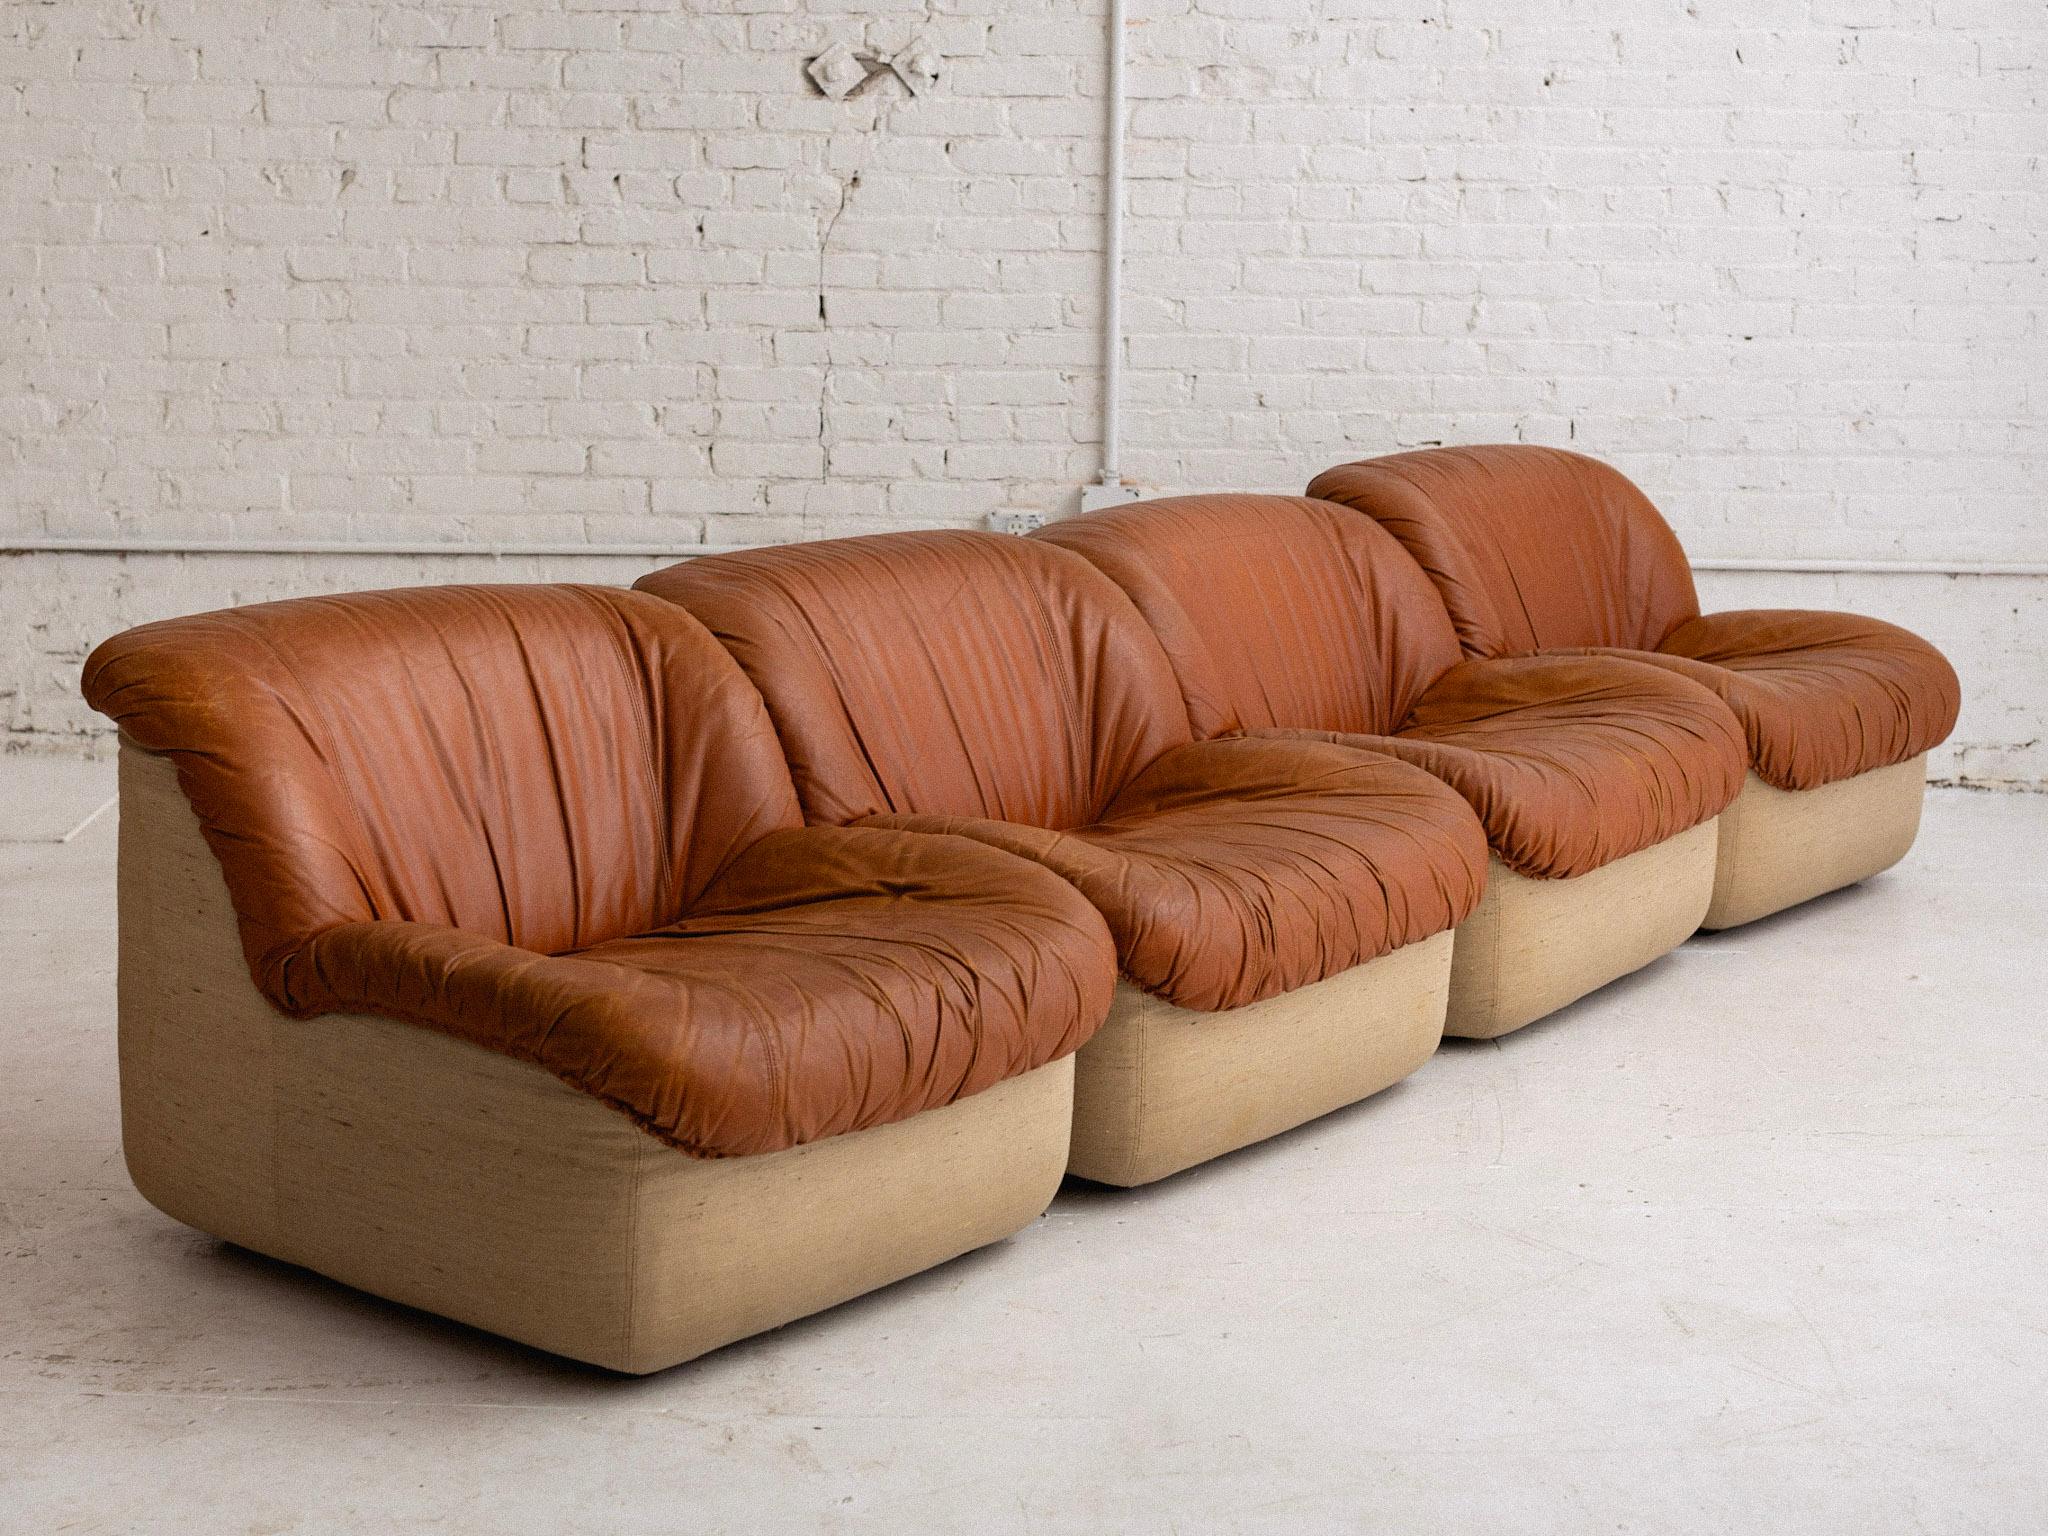 Cuir Henning Korch for Swan 'Caprice' Leather Chair / Modular Seating en vente